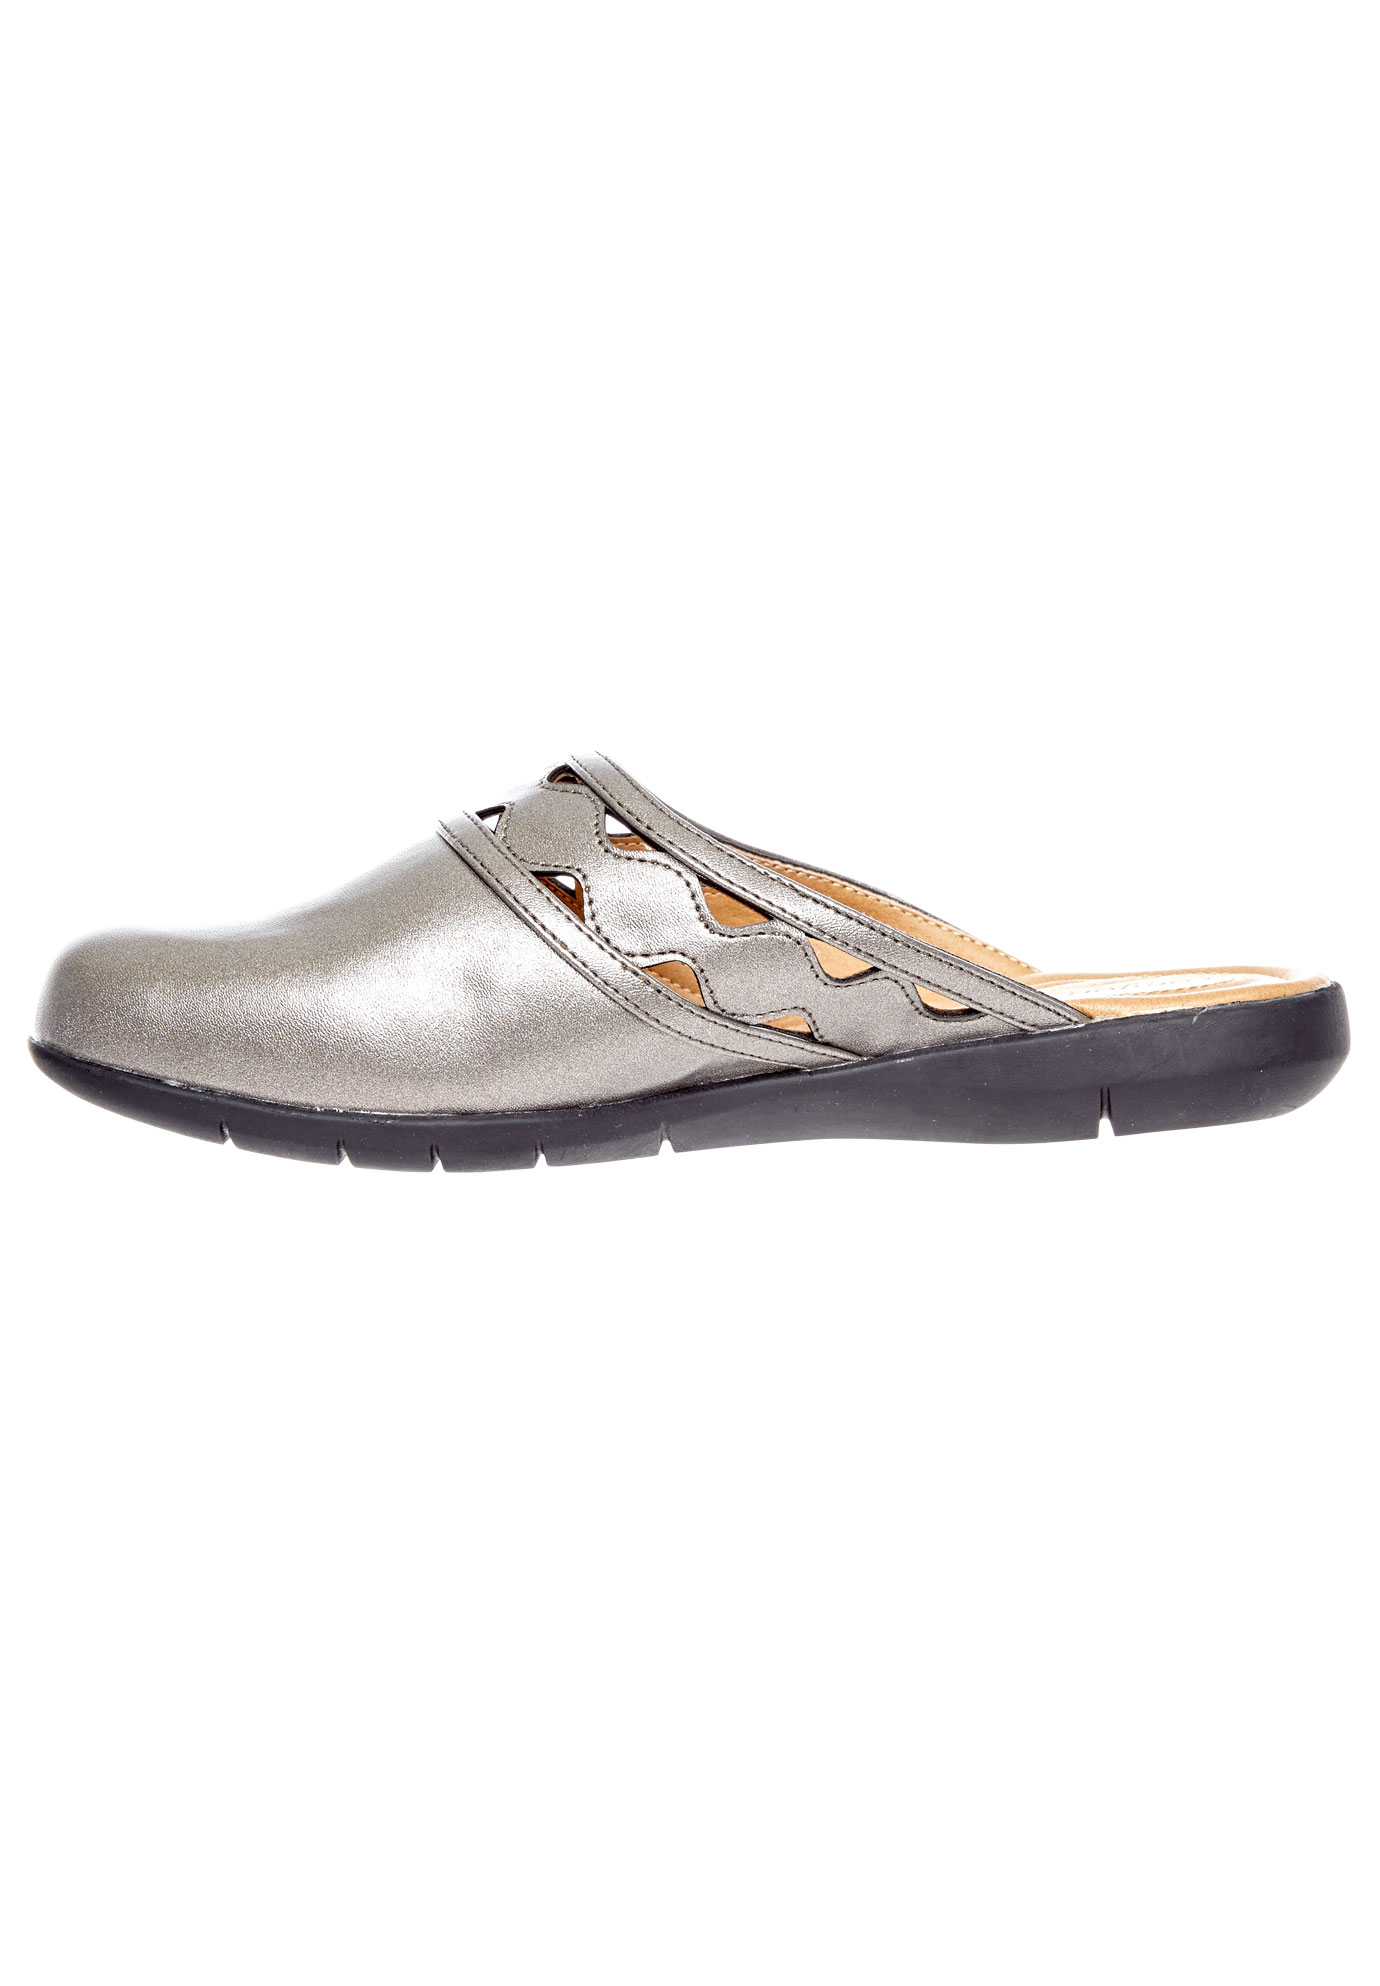 Comfortview Women's Wide Width The Mckenna Slip On Mule Shoes - image 5 of 7